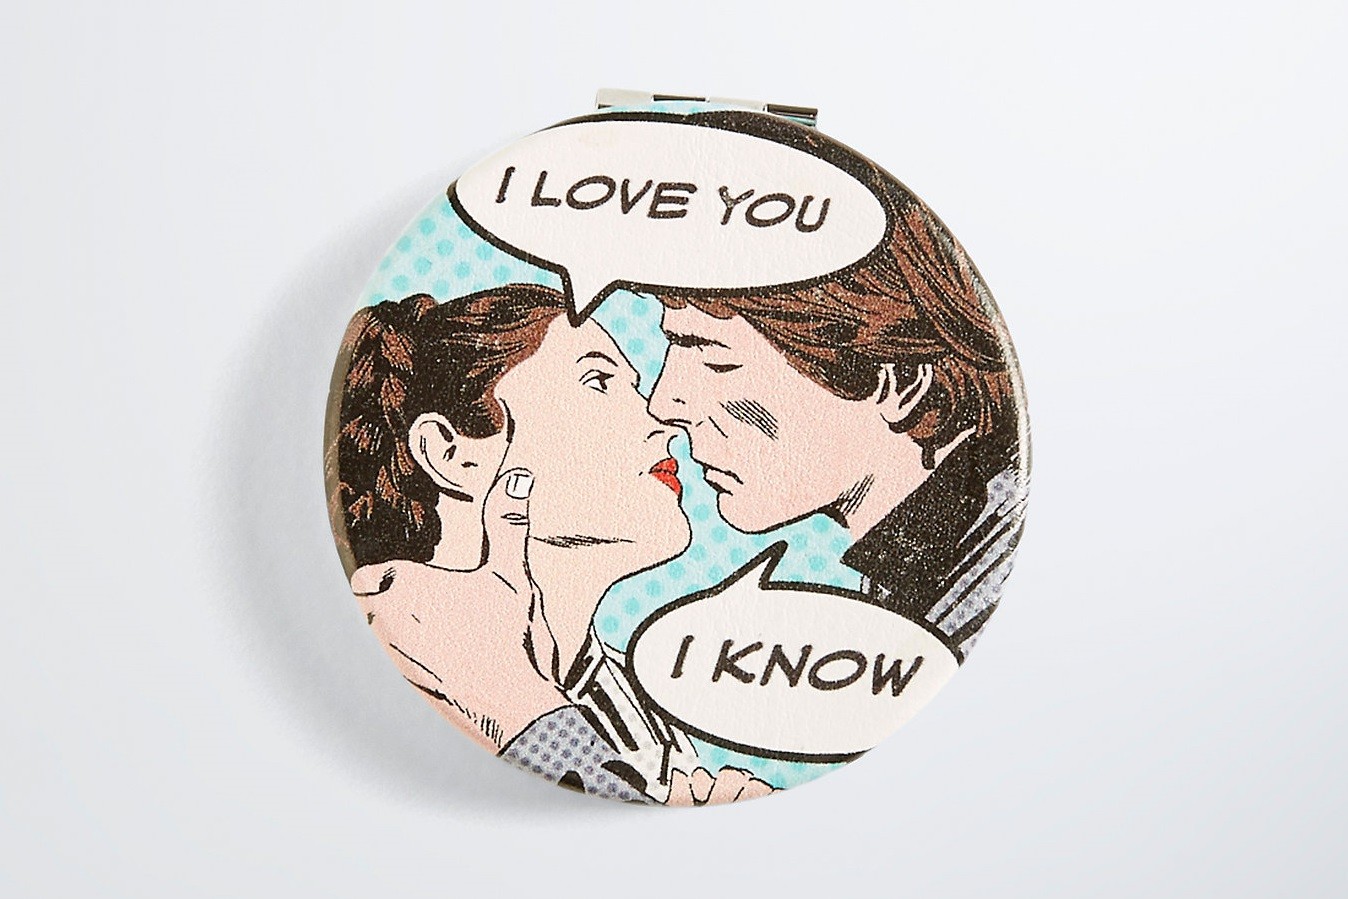 Torrid - 'I Love You' - 'I Know' compact mirror